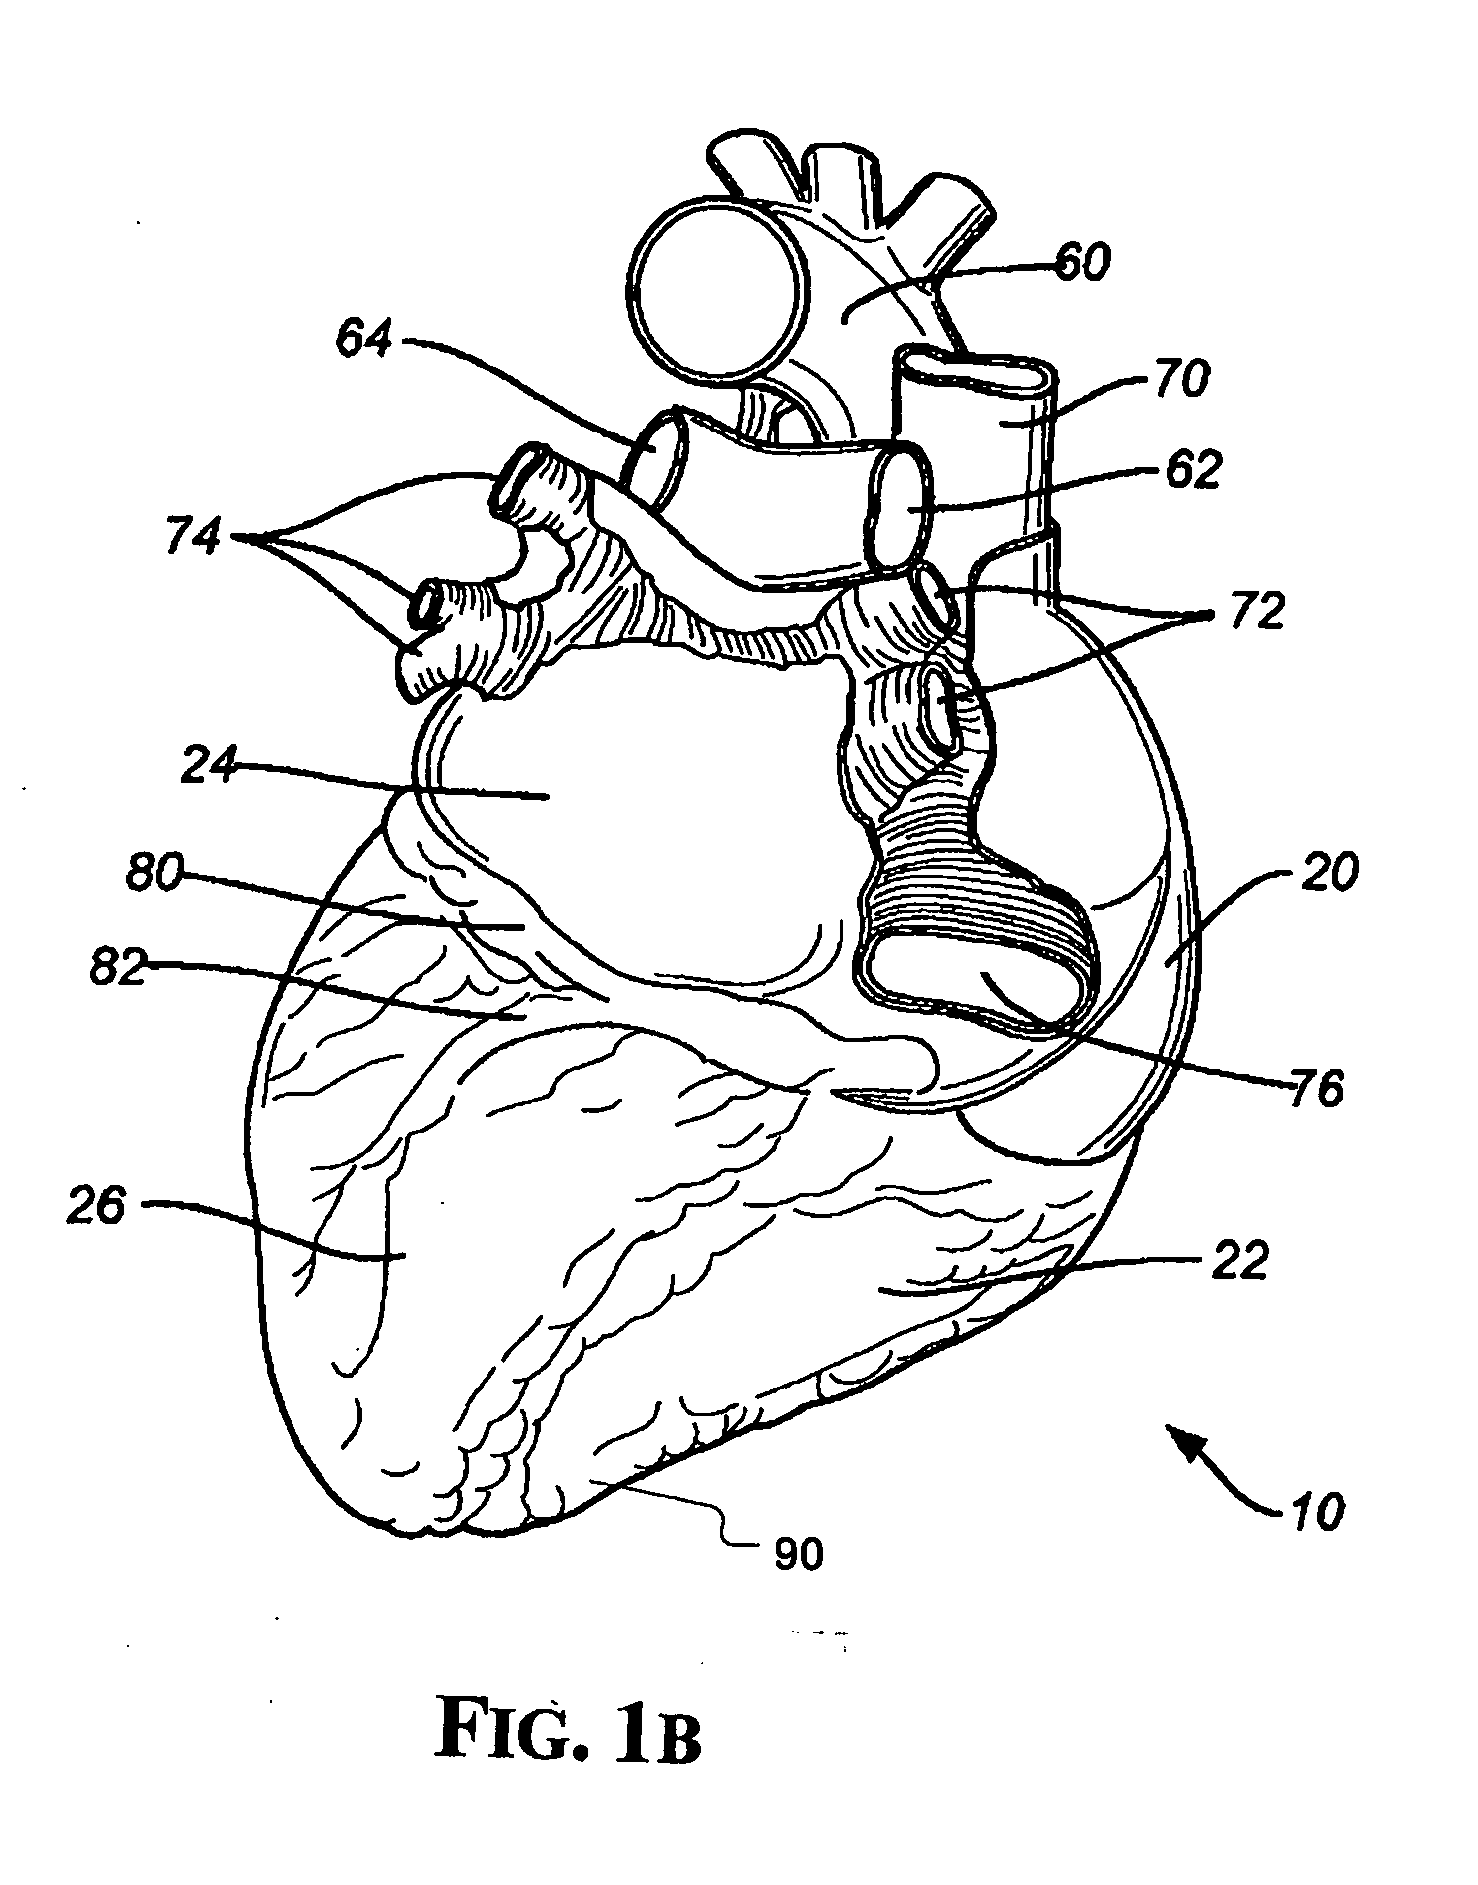 Implantable Micro-Generator Devices with Optimized Configuration, Methods of Use, Systems and Kits Therefor